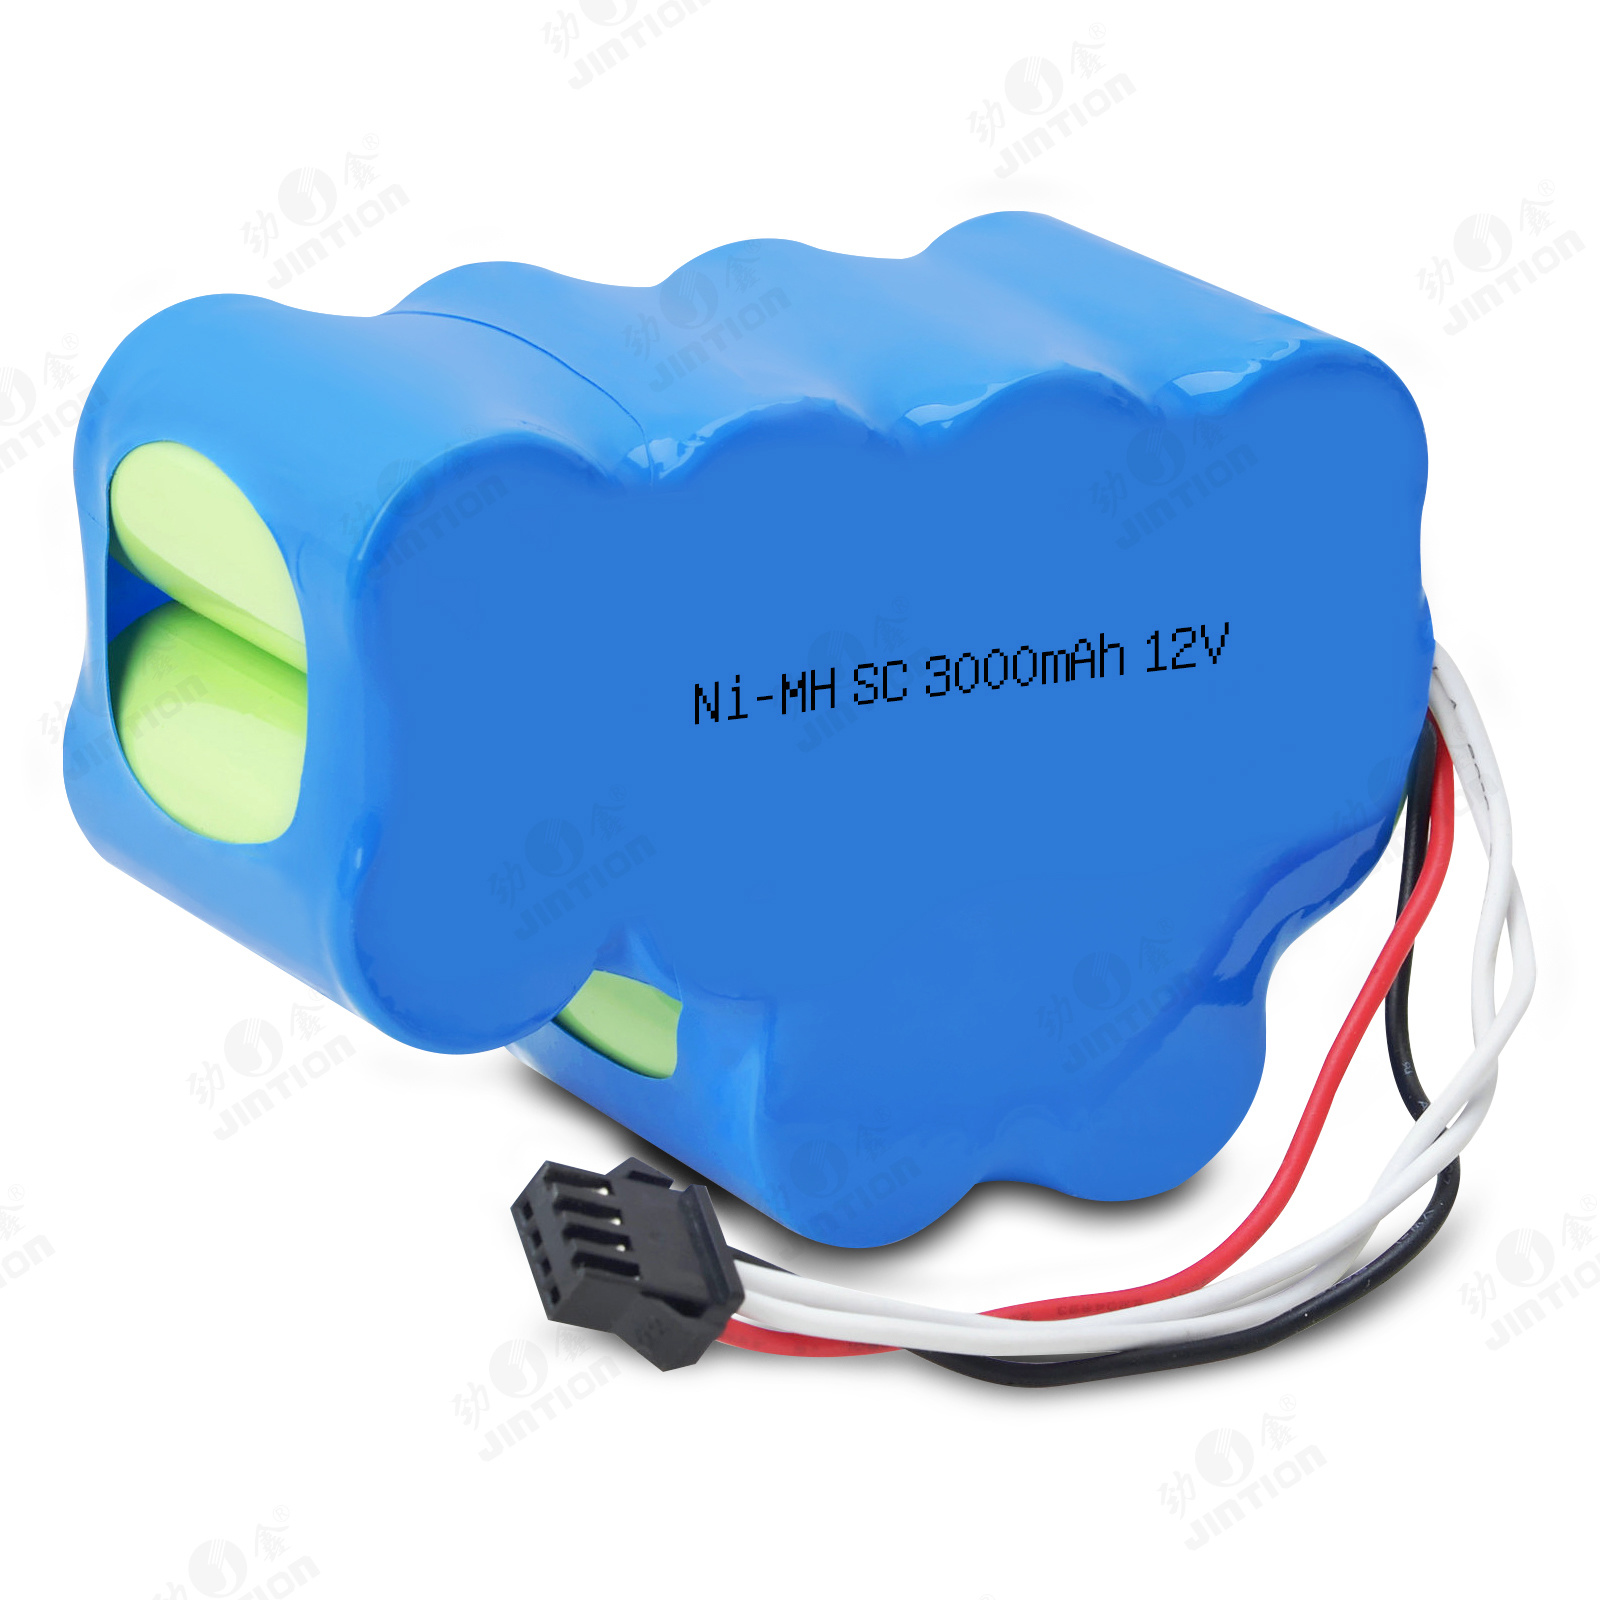 JINTION NIMH SC 3000MAH 12V nimh rechargeable battery for Alaris AS11044 MNC7100P NN1218WC3 AMED0090